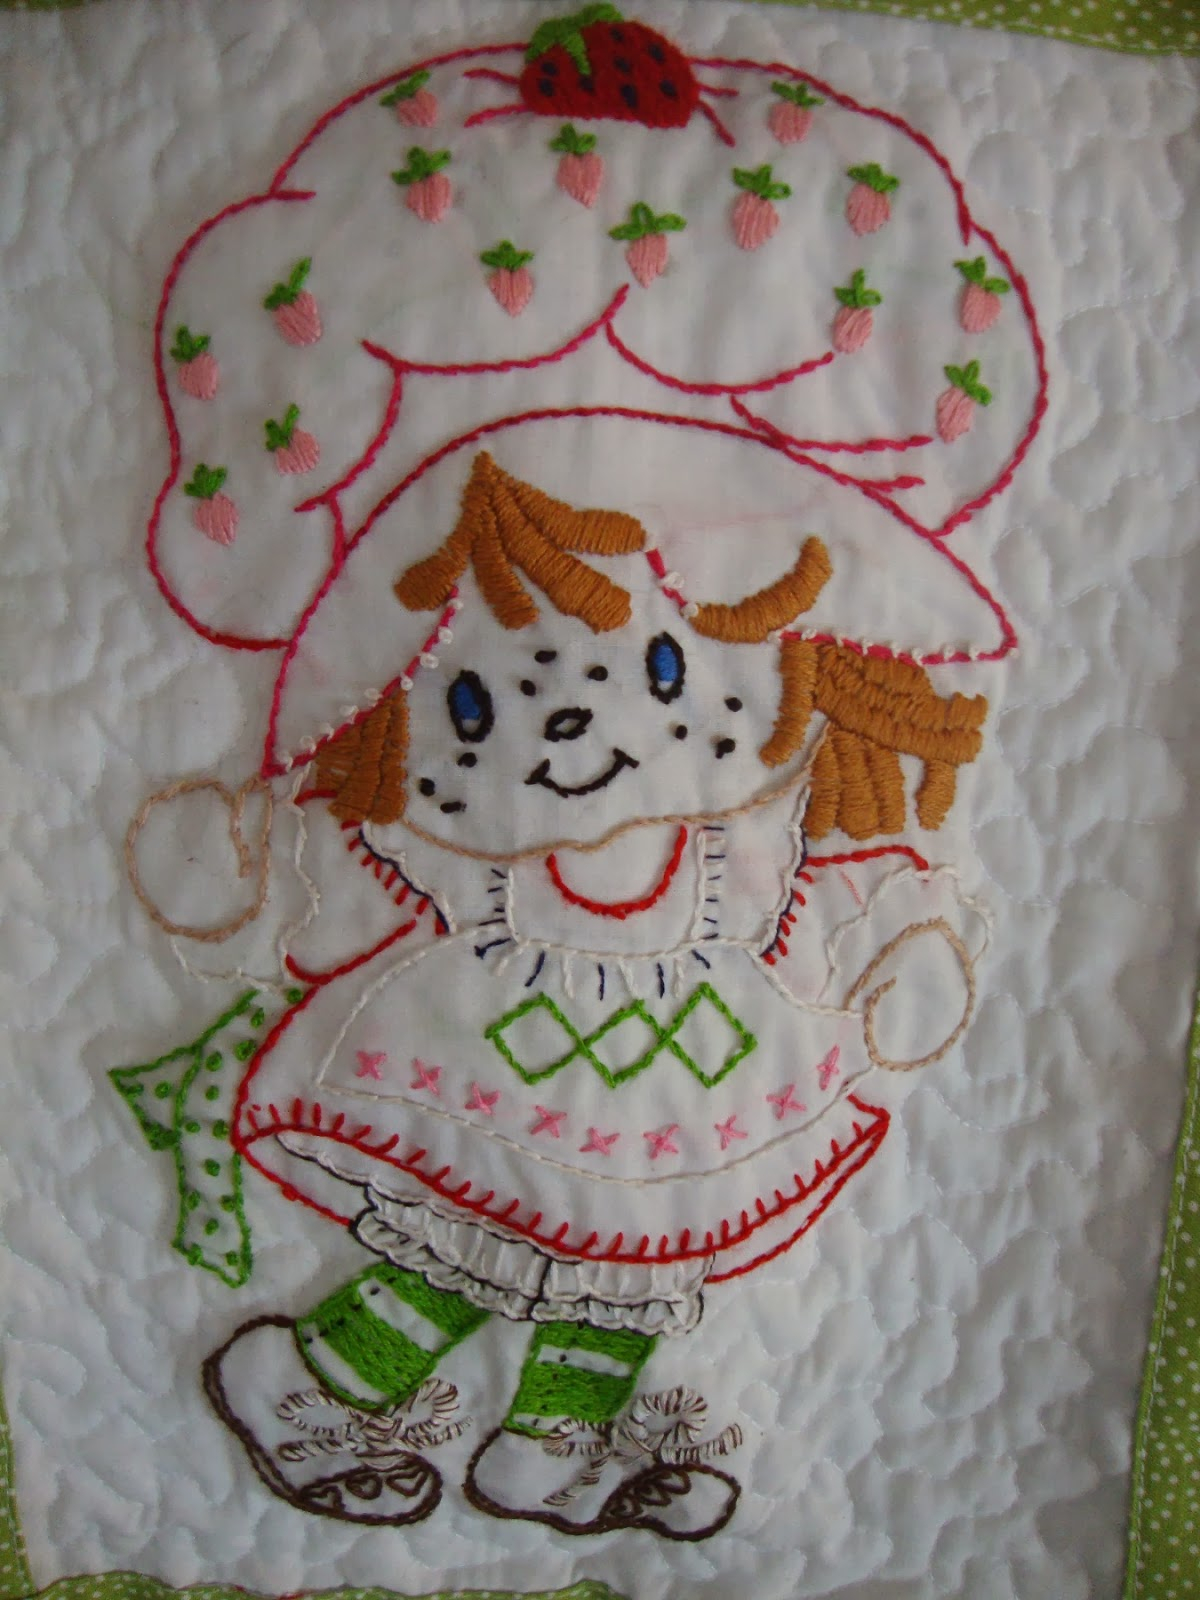 Hand Embroidery Patterns For Baby Quilts Simple Pleasures Vintage Strawberry Shortcake Ba Quilt